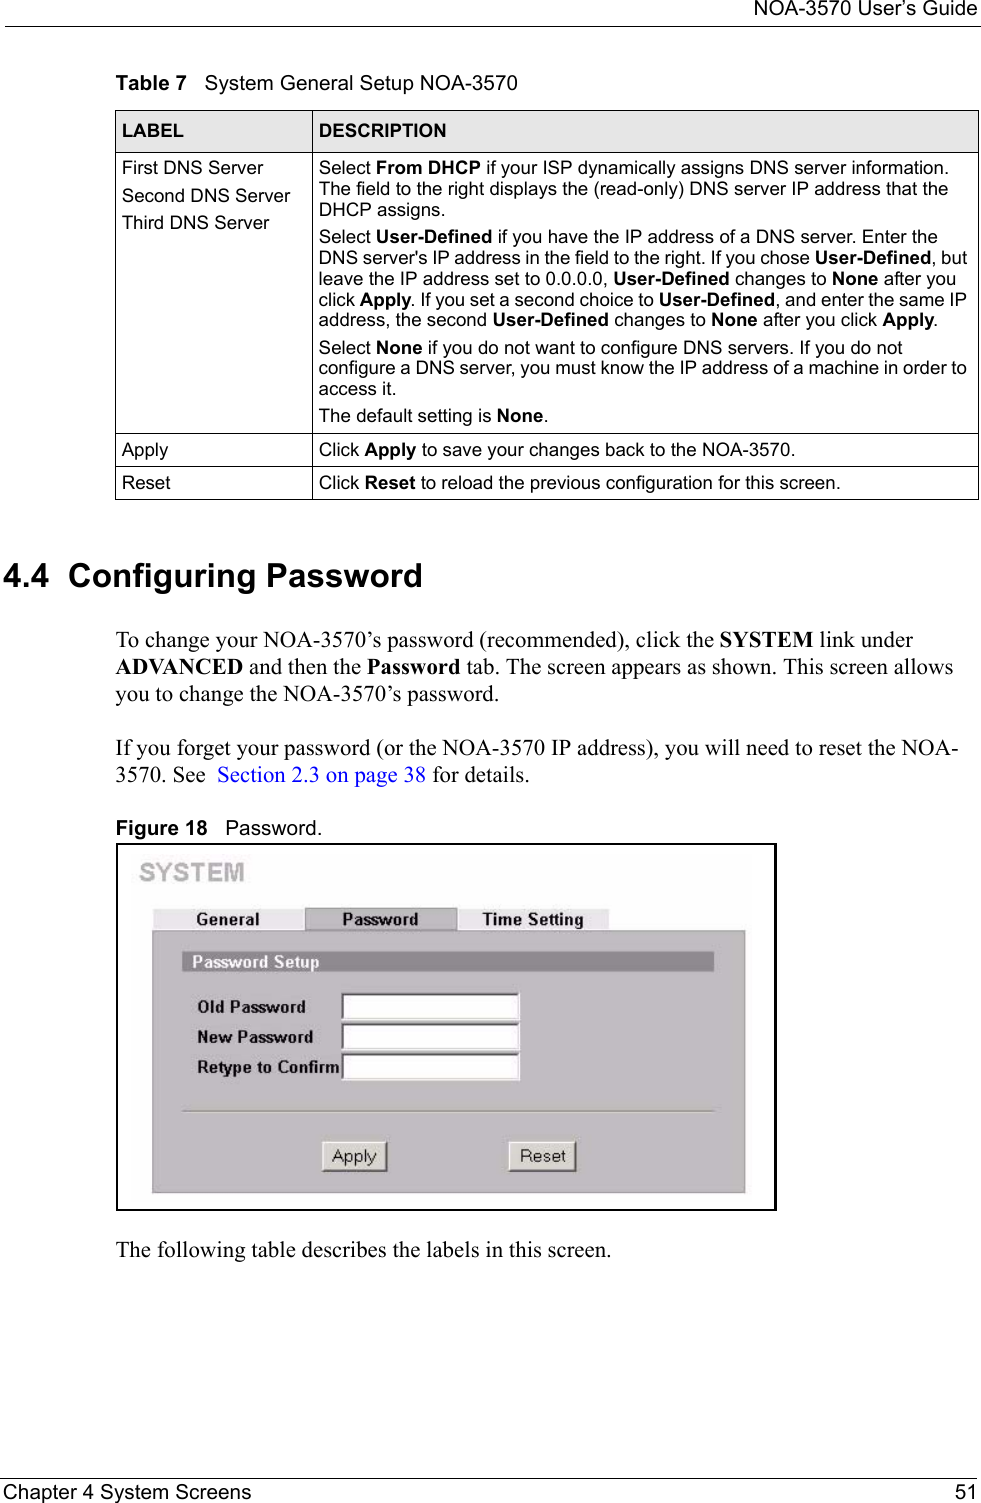 NOA-3570 User’s GuideChapter 4 System Screens 514.4  Configuring PasswordTo change your NOA-3570’s password (recommended), click the SYSTEM link under ADVANCED and then the Password tab. The screen appears as shown. This screen allows you to change the NOA-3570’s password.If you forget your password (or the NOA-3570 IP address), you will need to reset the NOA-3570. See  Section 2.3 on page 38 for details.Figure 18   Password.The following table describes the labels in this screen.First DNS ServerSecond DNS ServerThird DNS ServerSelect From DHCP if your ISP dynamically assigns DNS server information. The field to the right displays the (read-only) DNS server IP address that the DHCP assigns. Select User-Defined if you have the IP address of a DNS server. Enter the DNS server&apos;s IP address in the field to the right. If you chose User-Defined, but leave the IP address set to 0.0.0.0, User-Defined changes to None after you click Apply. If you set a second choice to User-Defined, and enter the same IP address, the second User-Defined changes to None after you click Apply. Select None if you do not want to configure DNS servers. If you do not configure a DNS server, you must know the IP address of a machine in order to access it.The default setting is None.Apply Click Apply to save your changes back to the NOA-3570.Reset Click Reset to reload the previous configuration for this screen.Table 7   System General Setup NOA-3570LABEL DESCRIPTION